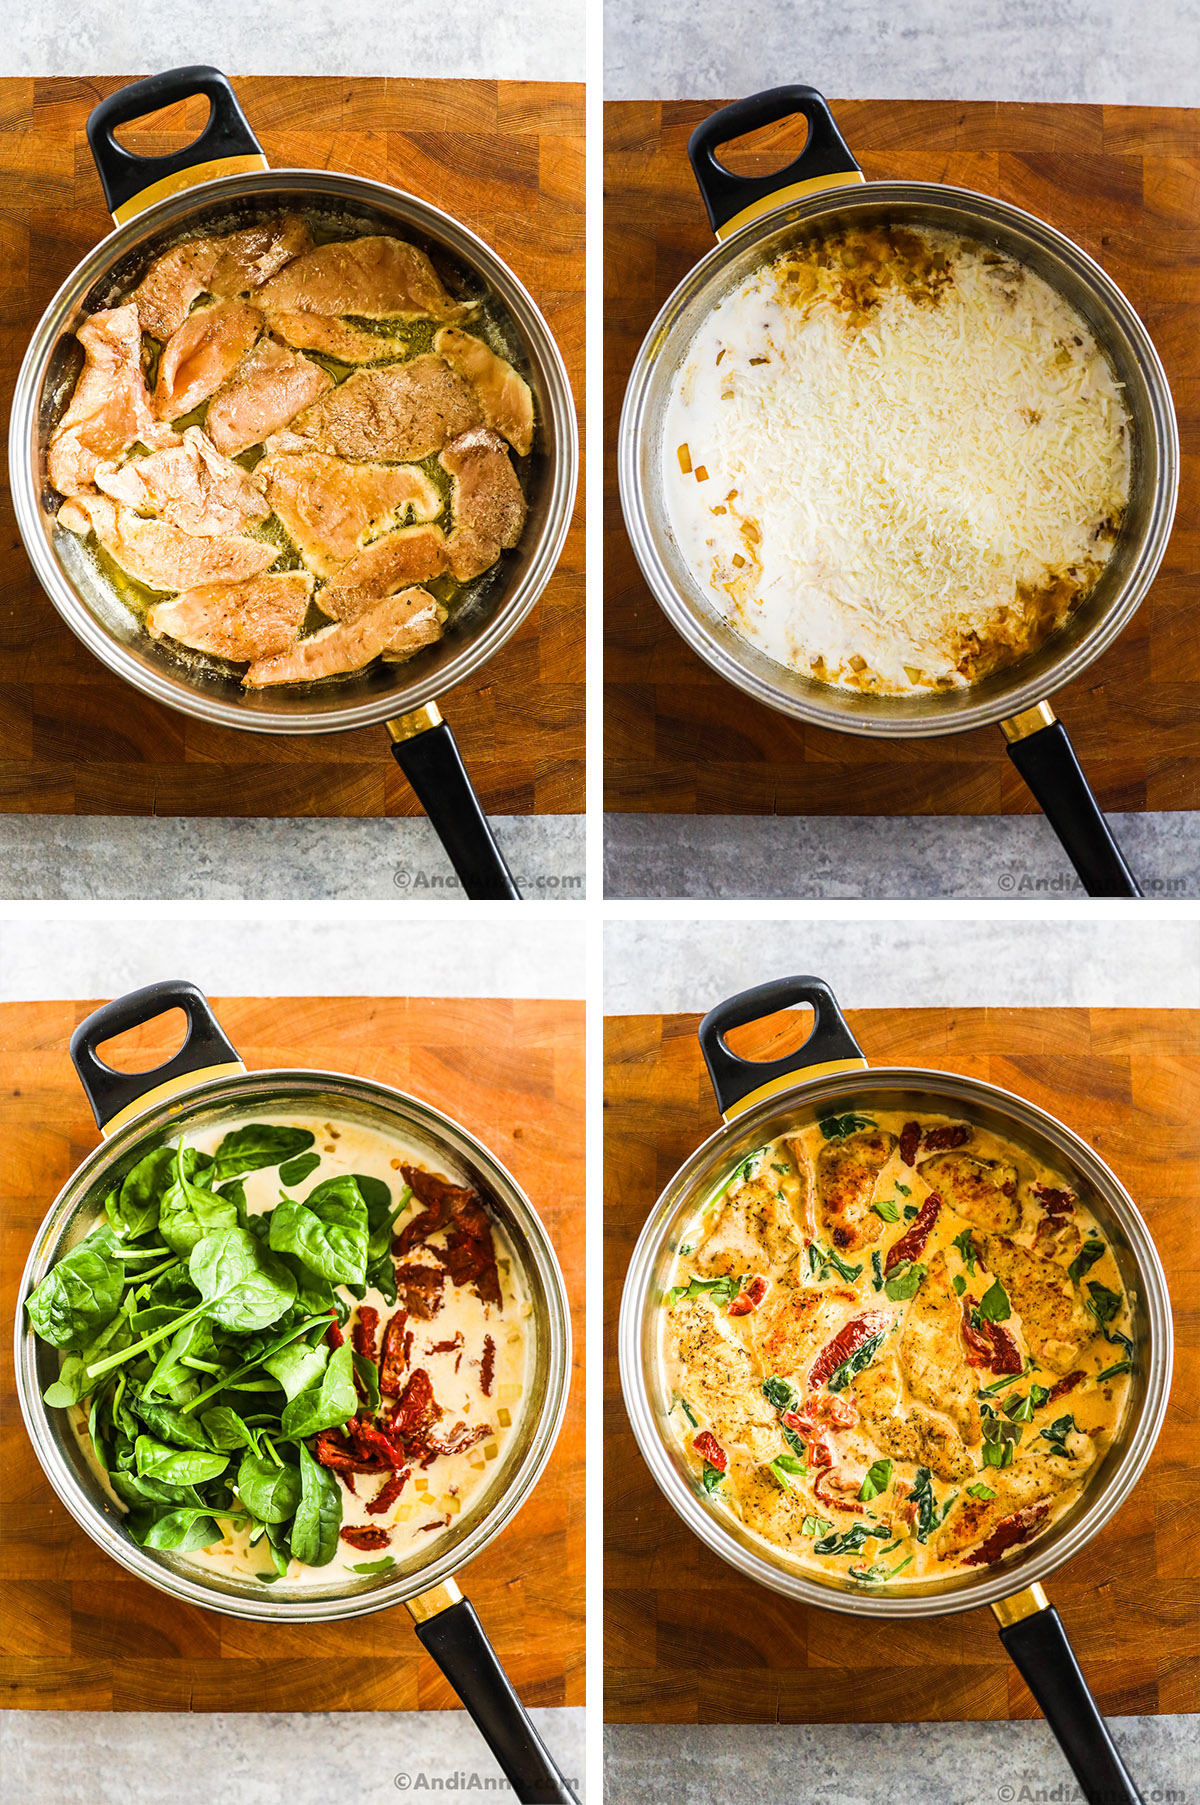 Four images showing steps to make recipe in a pot. First is raw chicken cooking. Second is creamy sauce with grated parmesan dumped in. Third is spinach and sliced sun dried tomatoes dumped on top of a creamy sauce. Fourth is the cooked final tuscan chicken recipe.